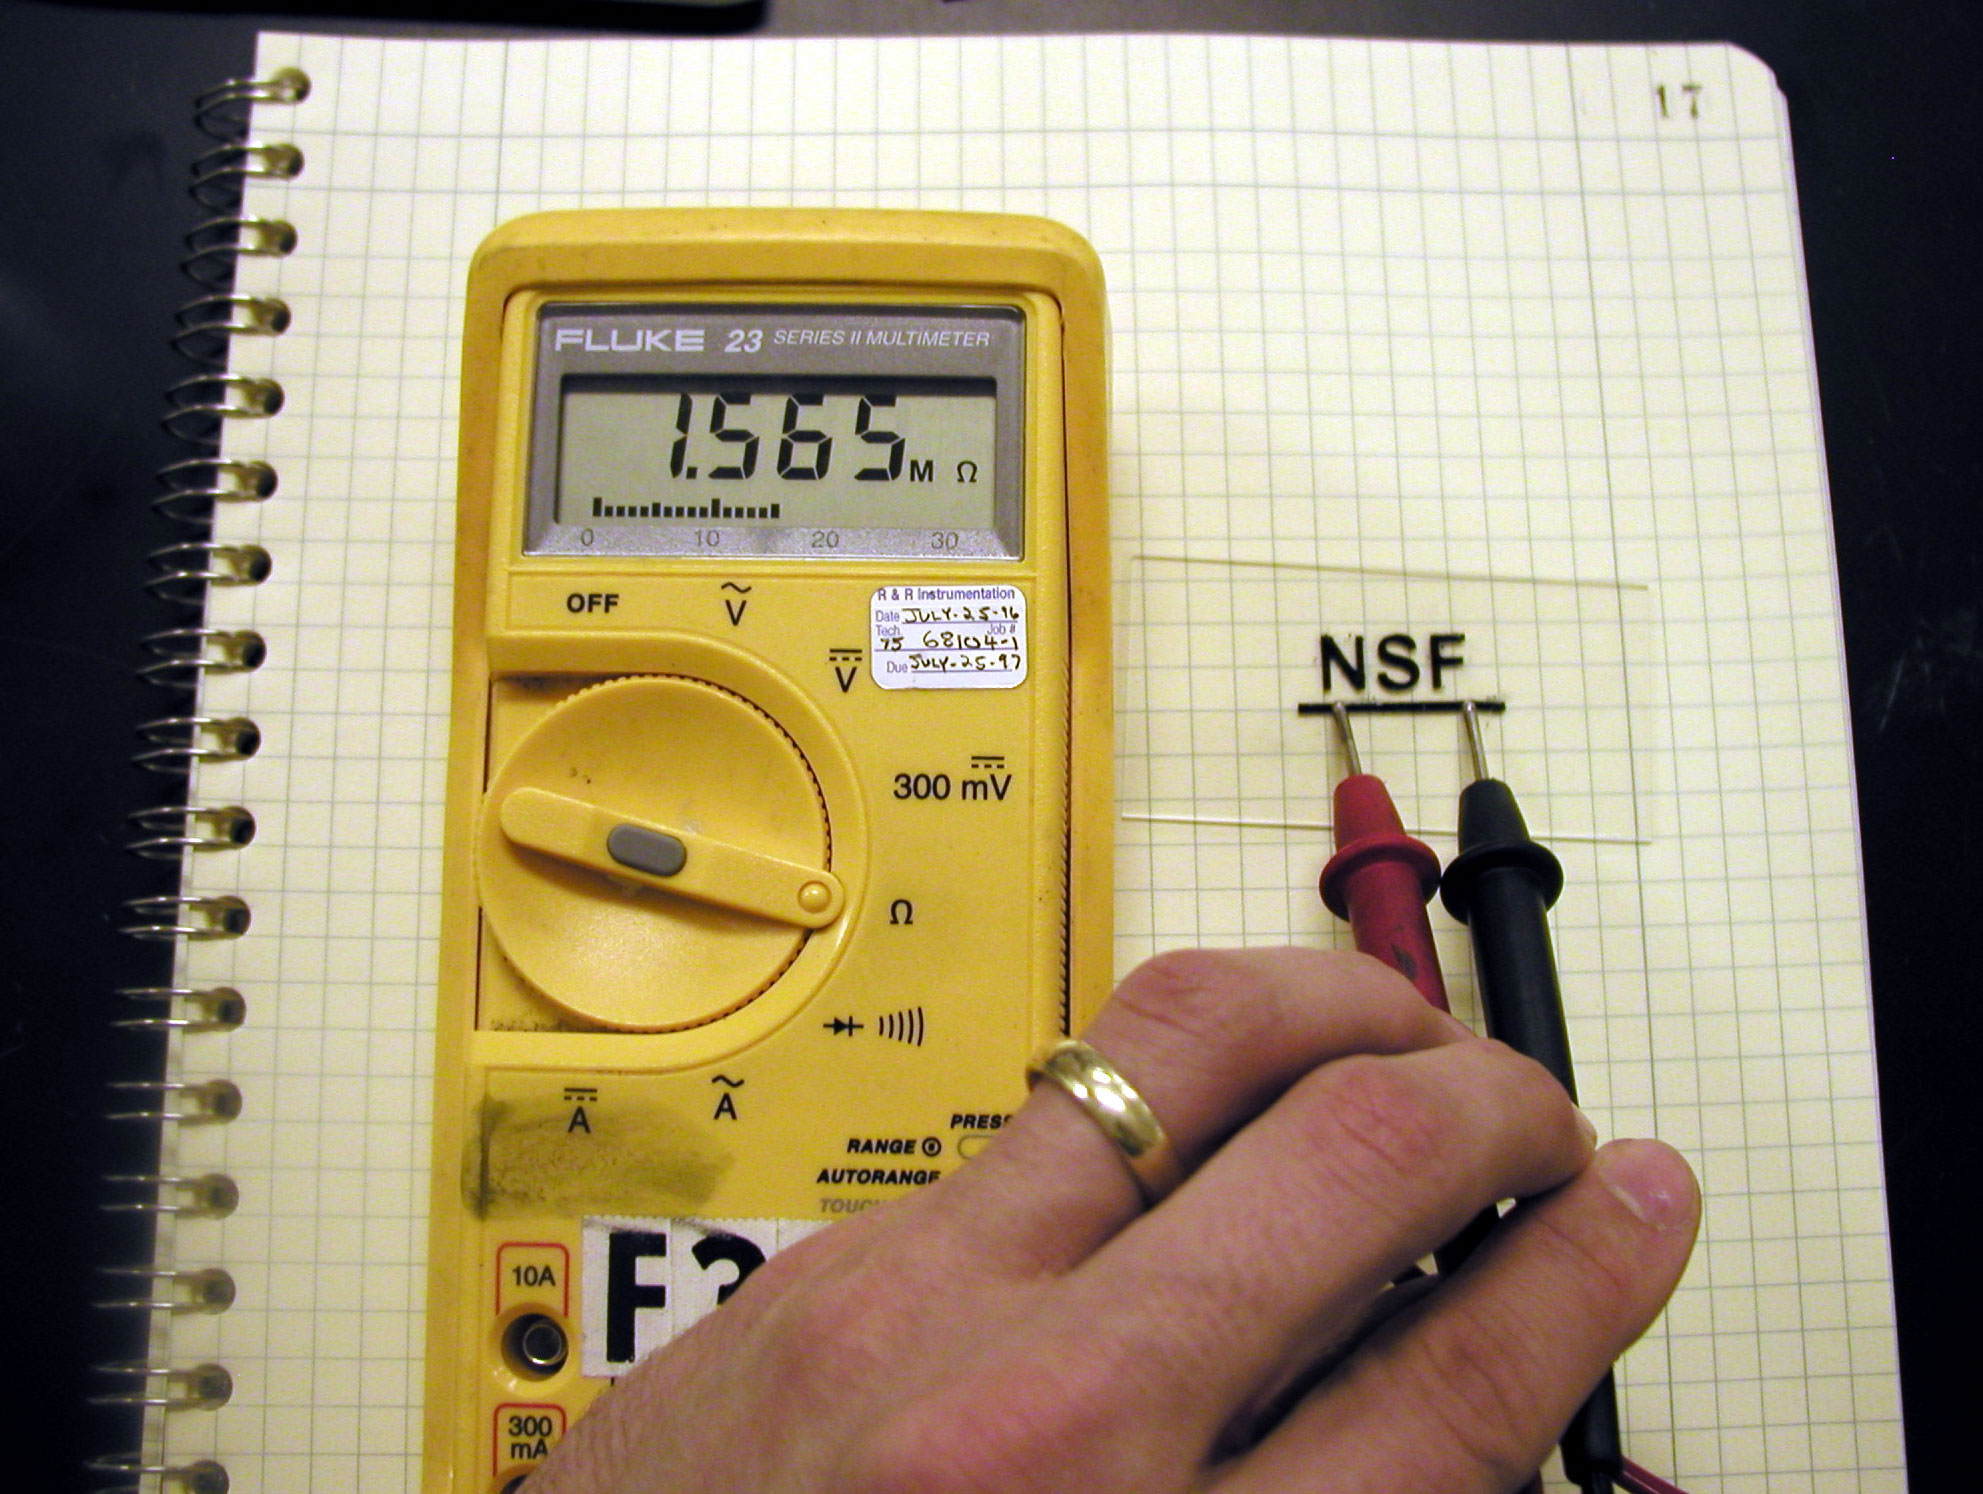 Demonstrating the conductivity of the photoprinted "NSF" image